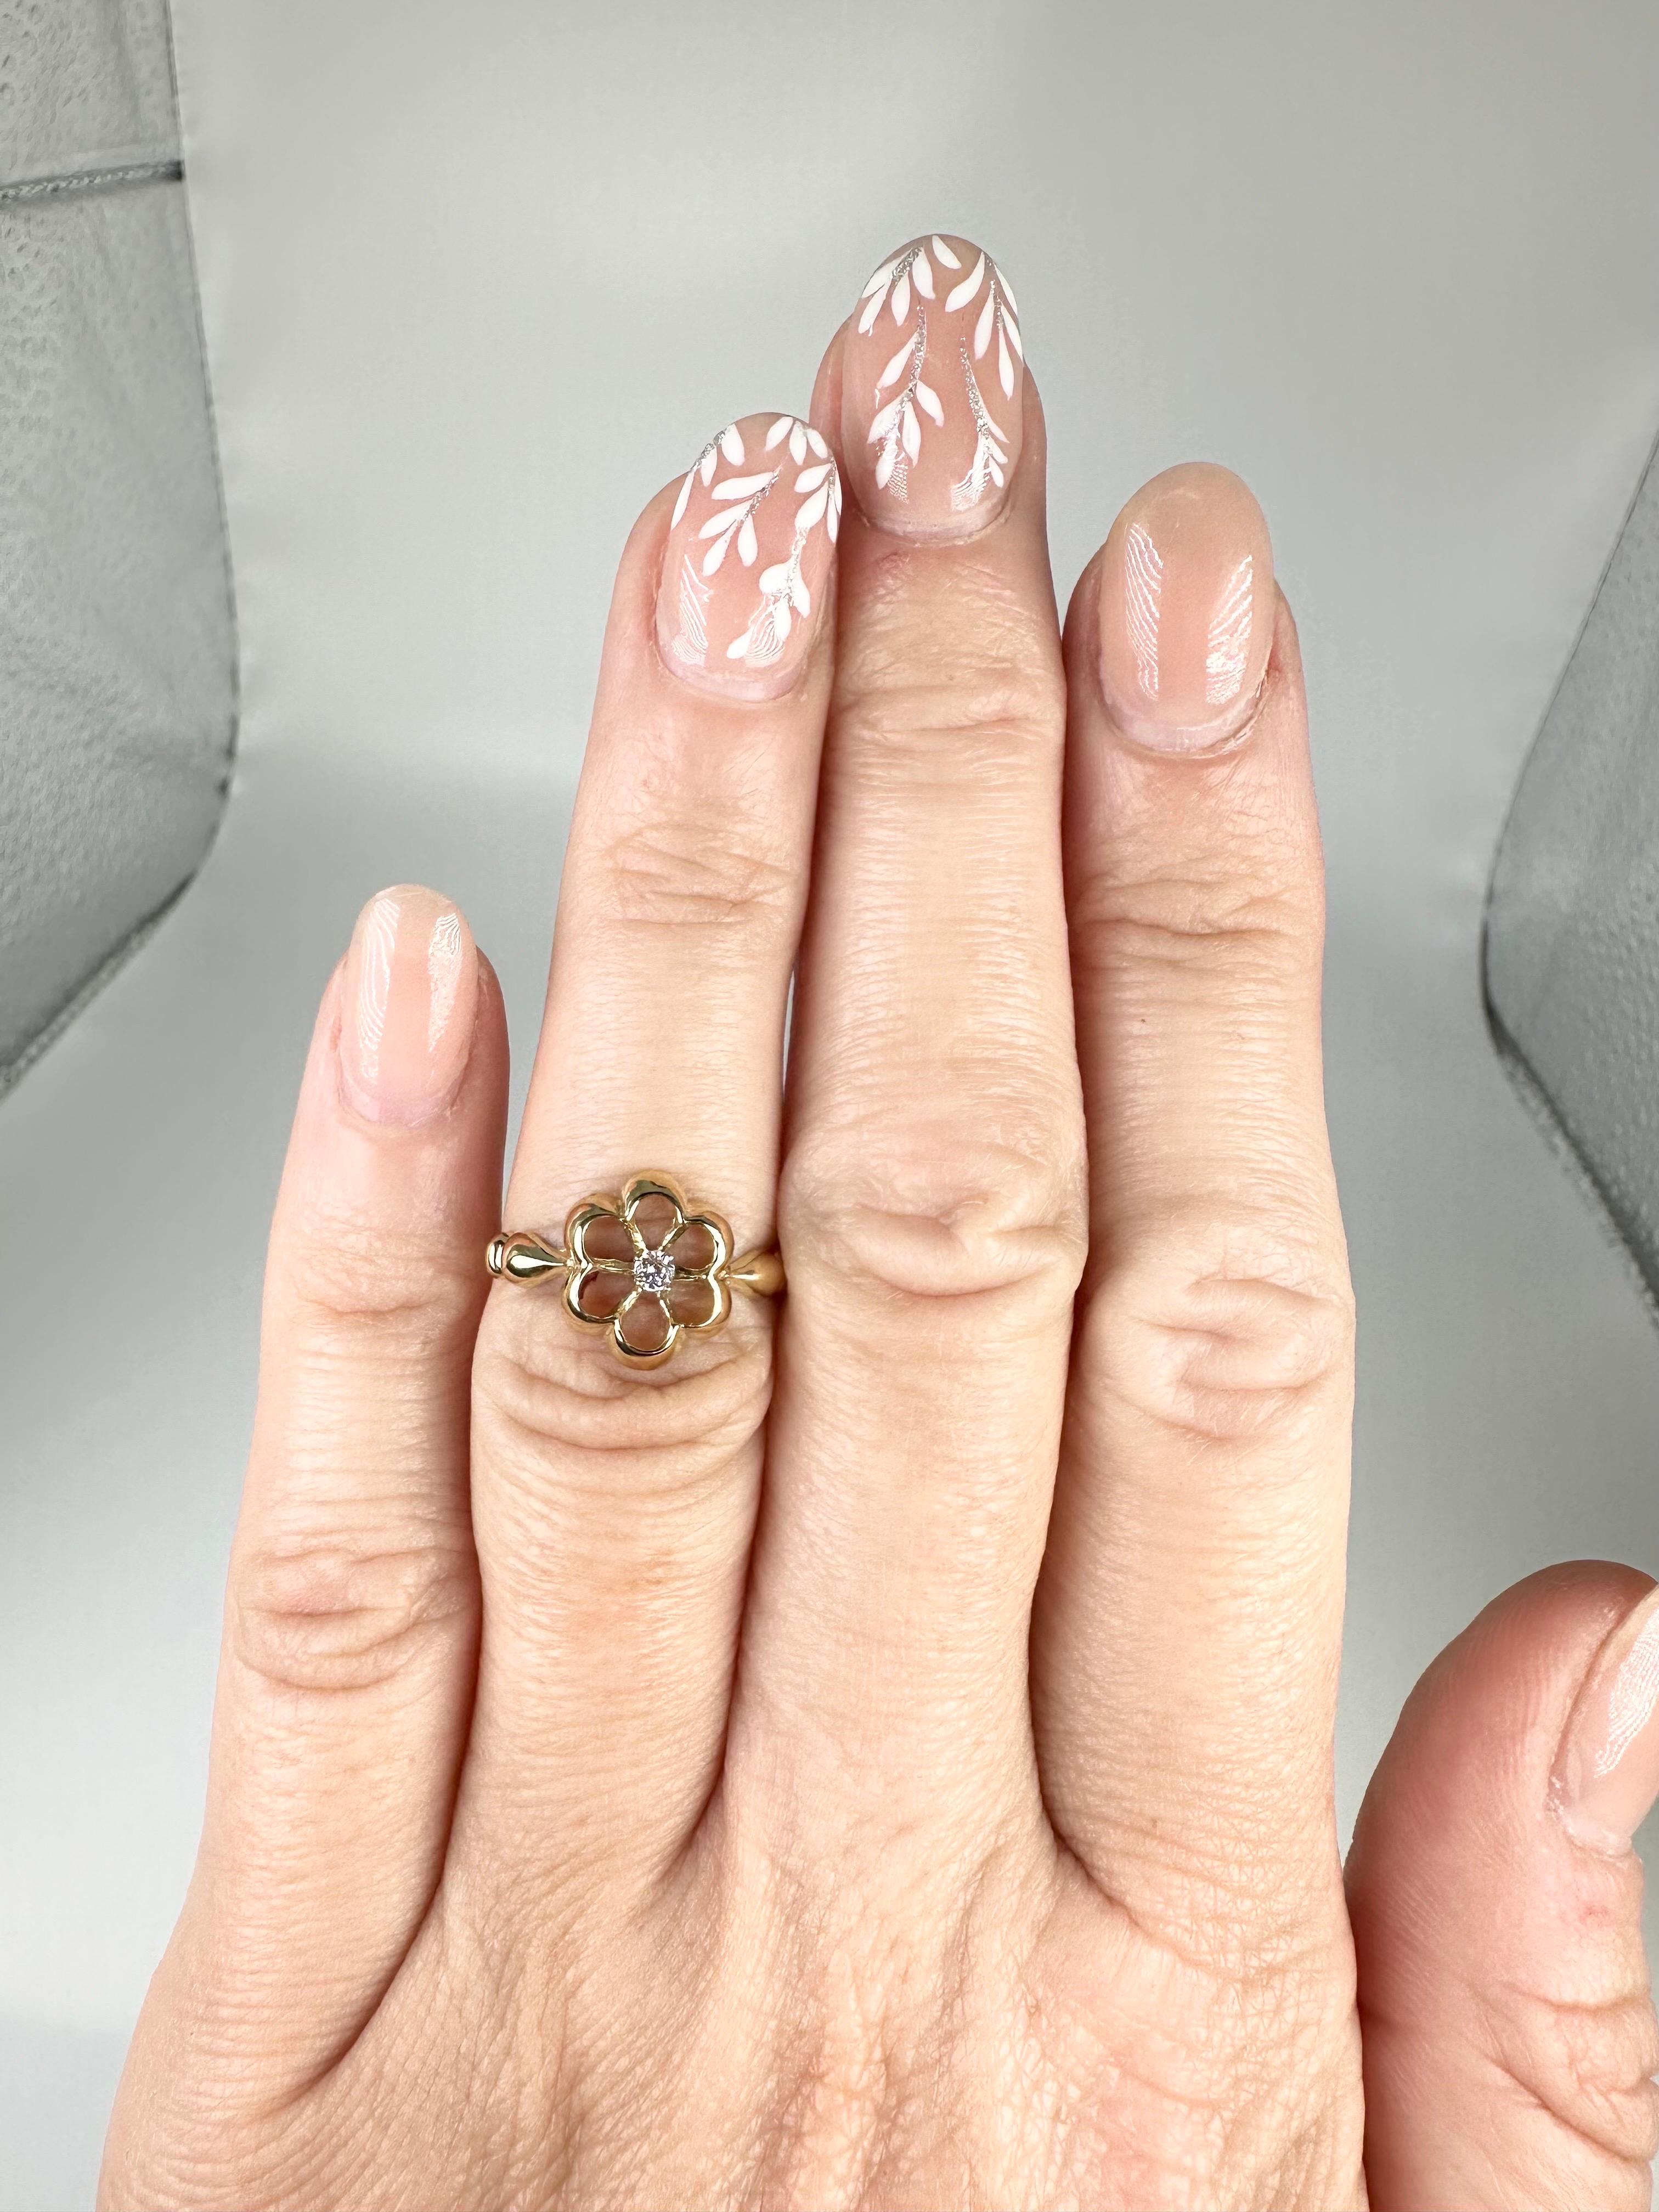 Floral Diamond Ring 18 Karat Yellow Gold Promise Ring Flower Ring In New Condition For Sale In Jupiter, FL